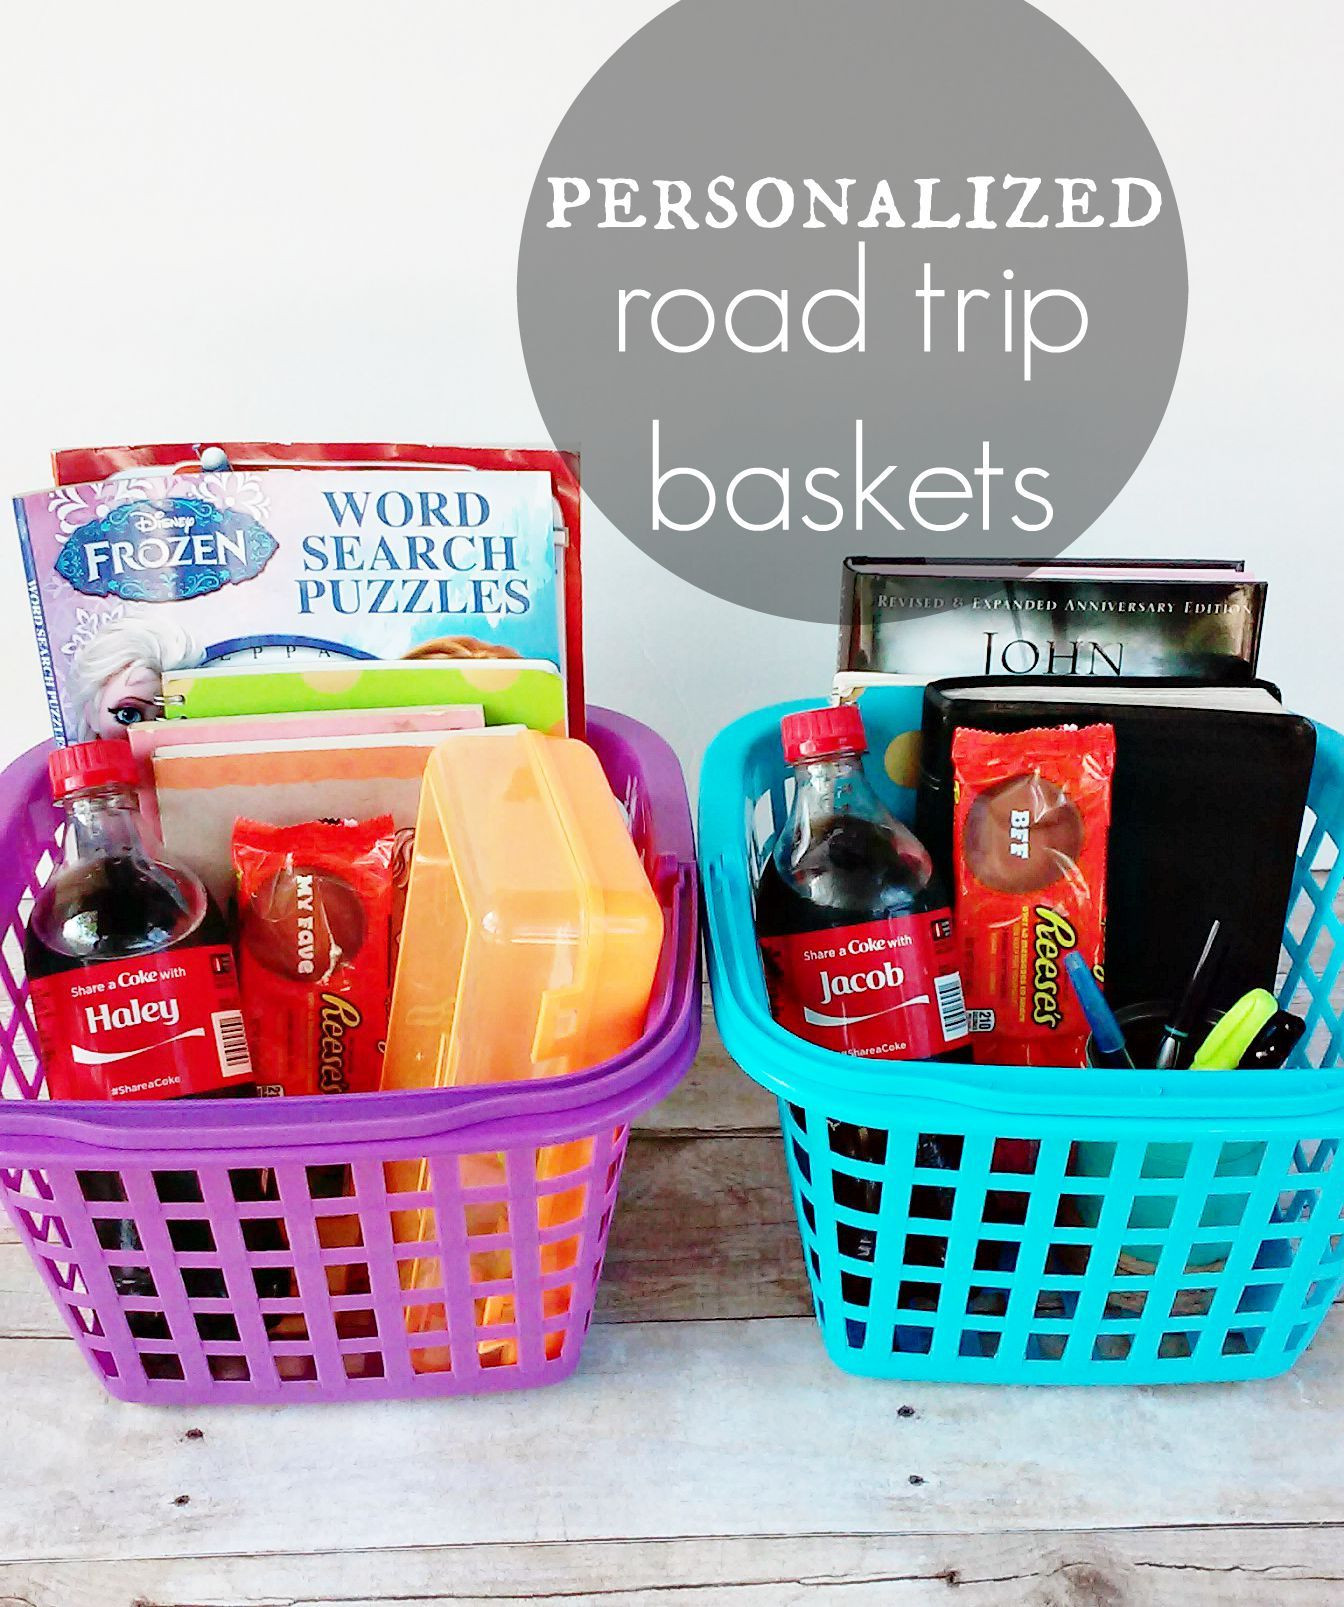 Travel Themed Gift Basket Ideas
 personalized road trip baskets